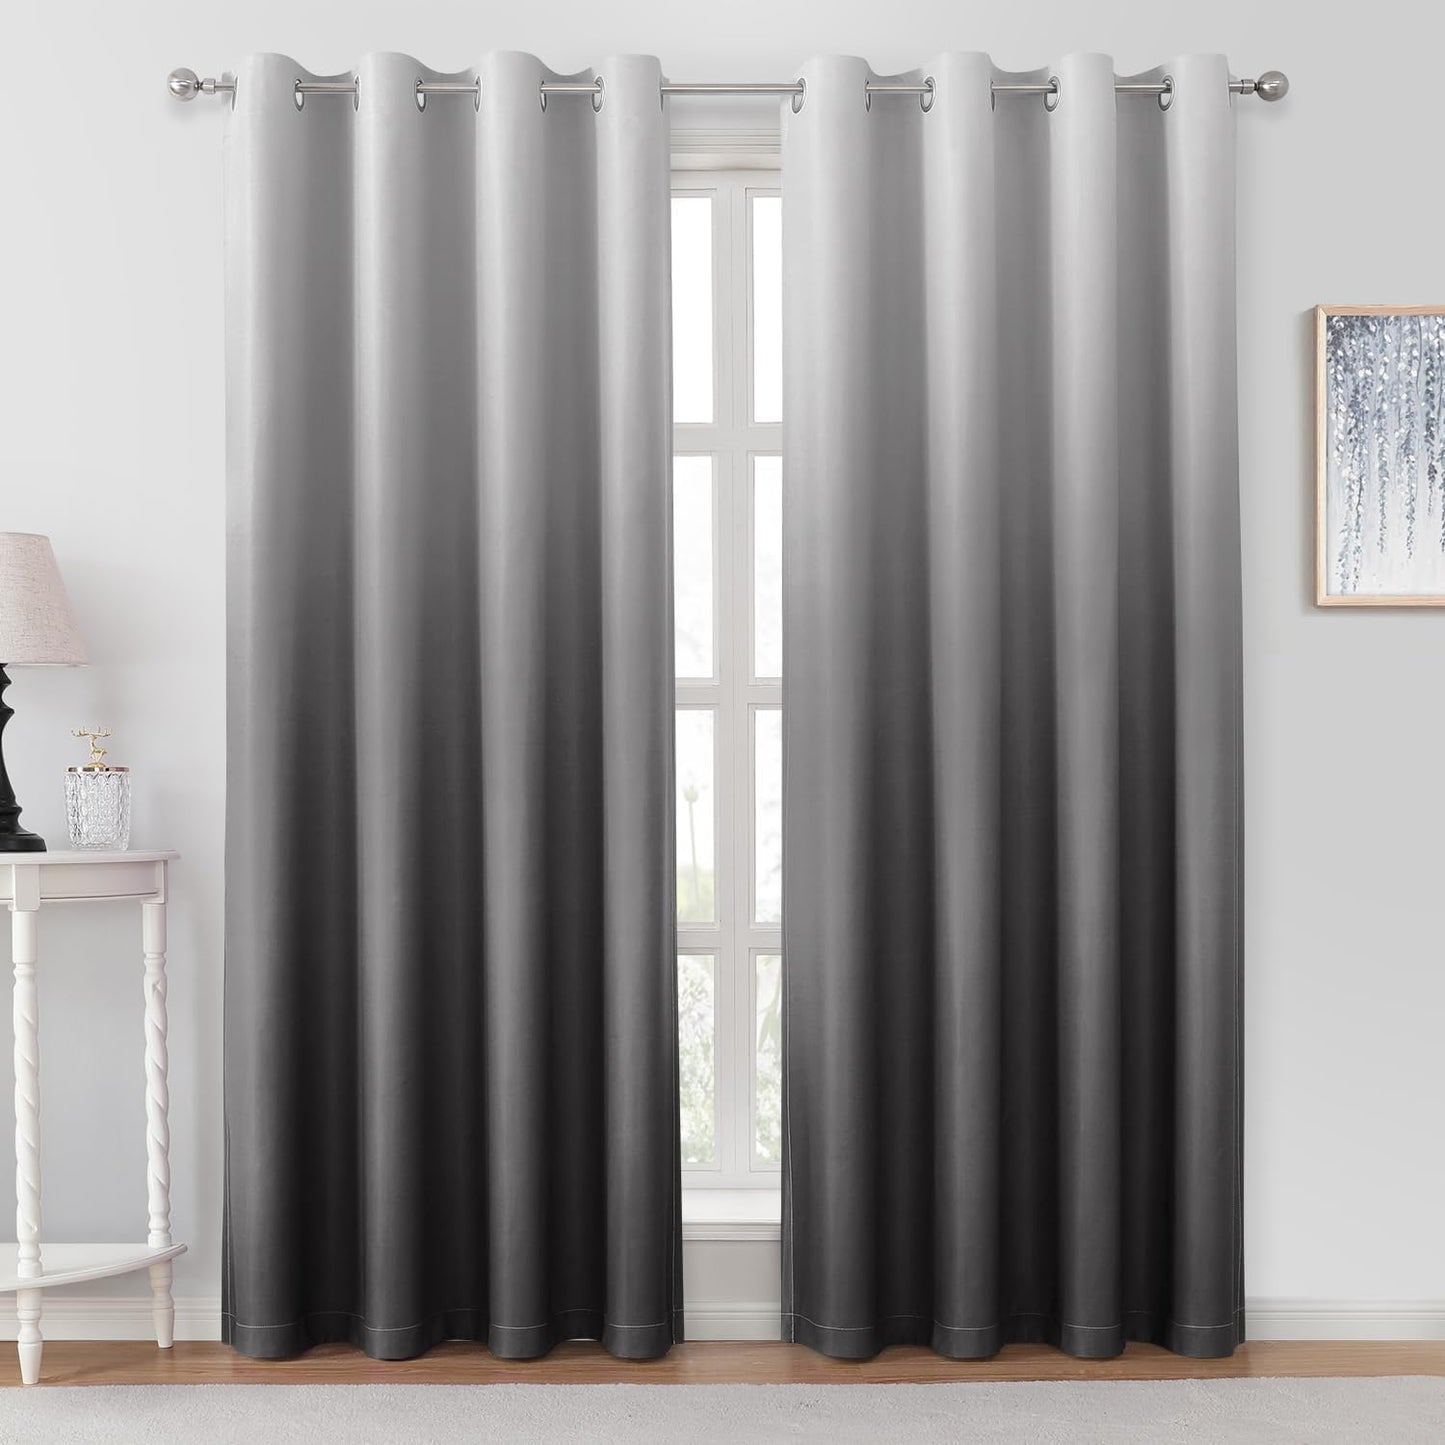 HOMEIDEAS Navy Blue Ombre Blackout Curtains 52 X 84 Inch Length Gradient Room Darkening Thermal Insulated Energy Saving Grommet 2 Panels Window Drapes for Living Room/Bedroom  HOMEIDEAS Grey 52"W X 96"L 